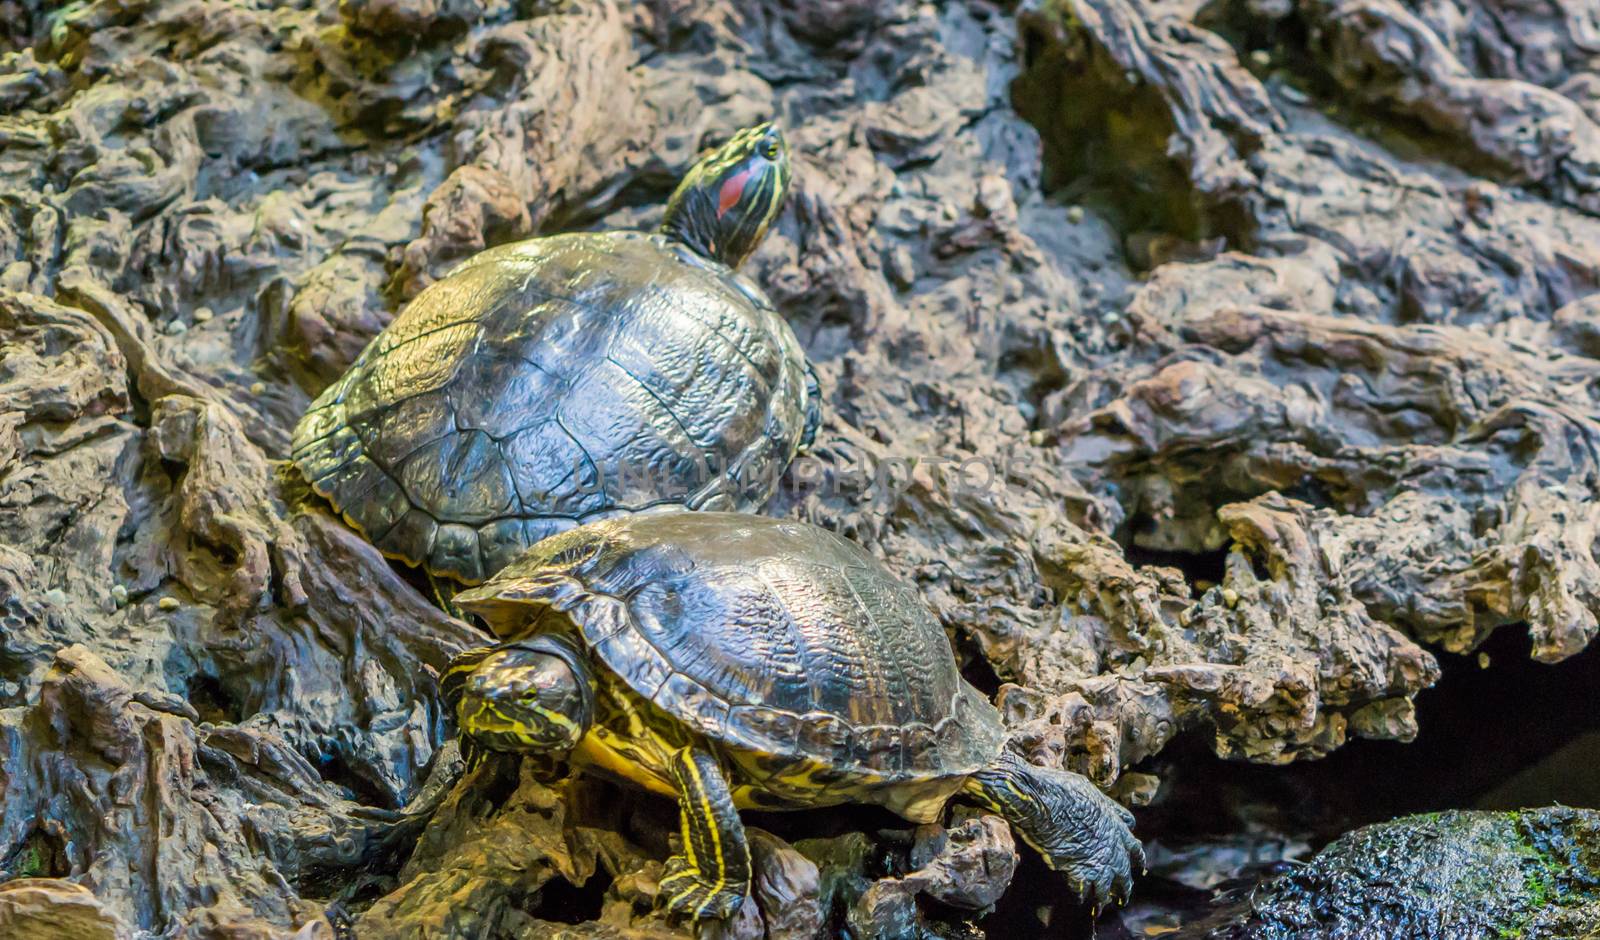 red eared slider and yellow bellied slider together in closeup, tropical reptile pets from America by charlottebleijenberg